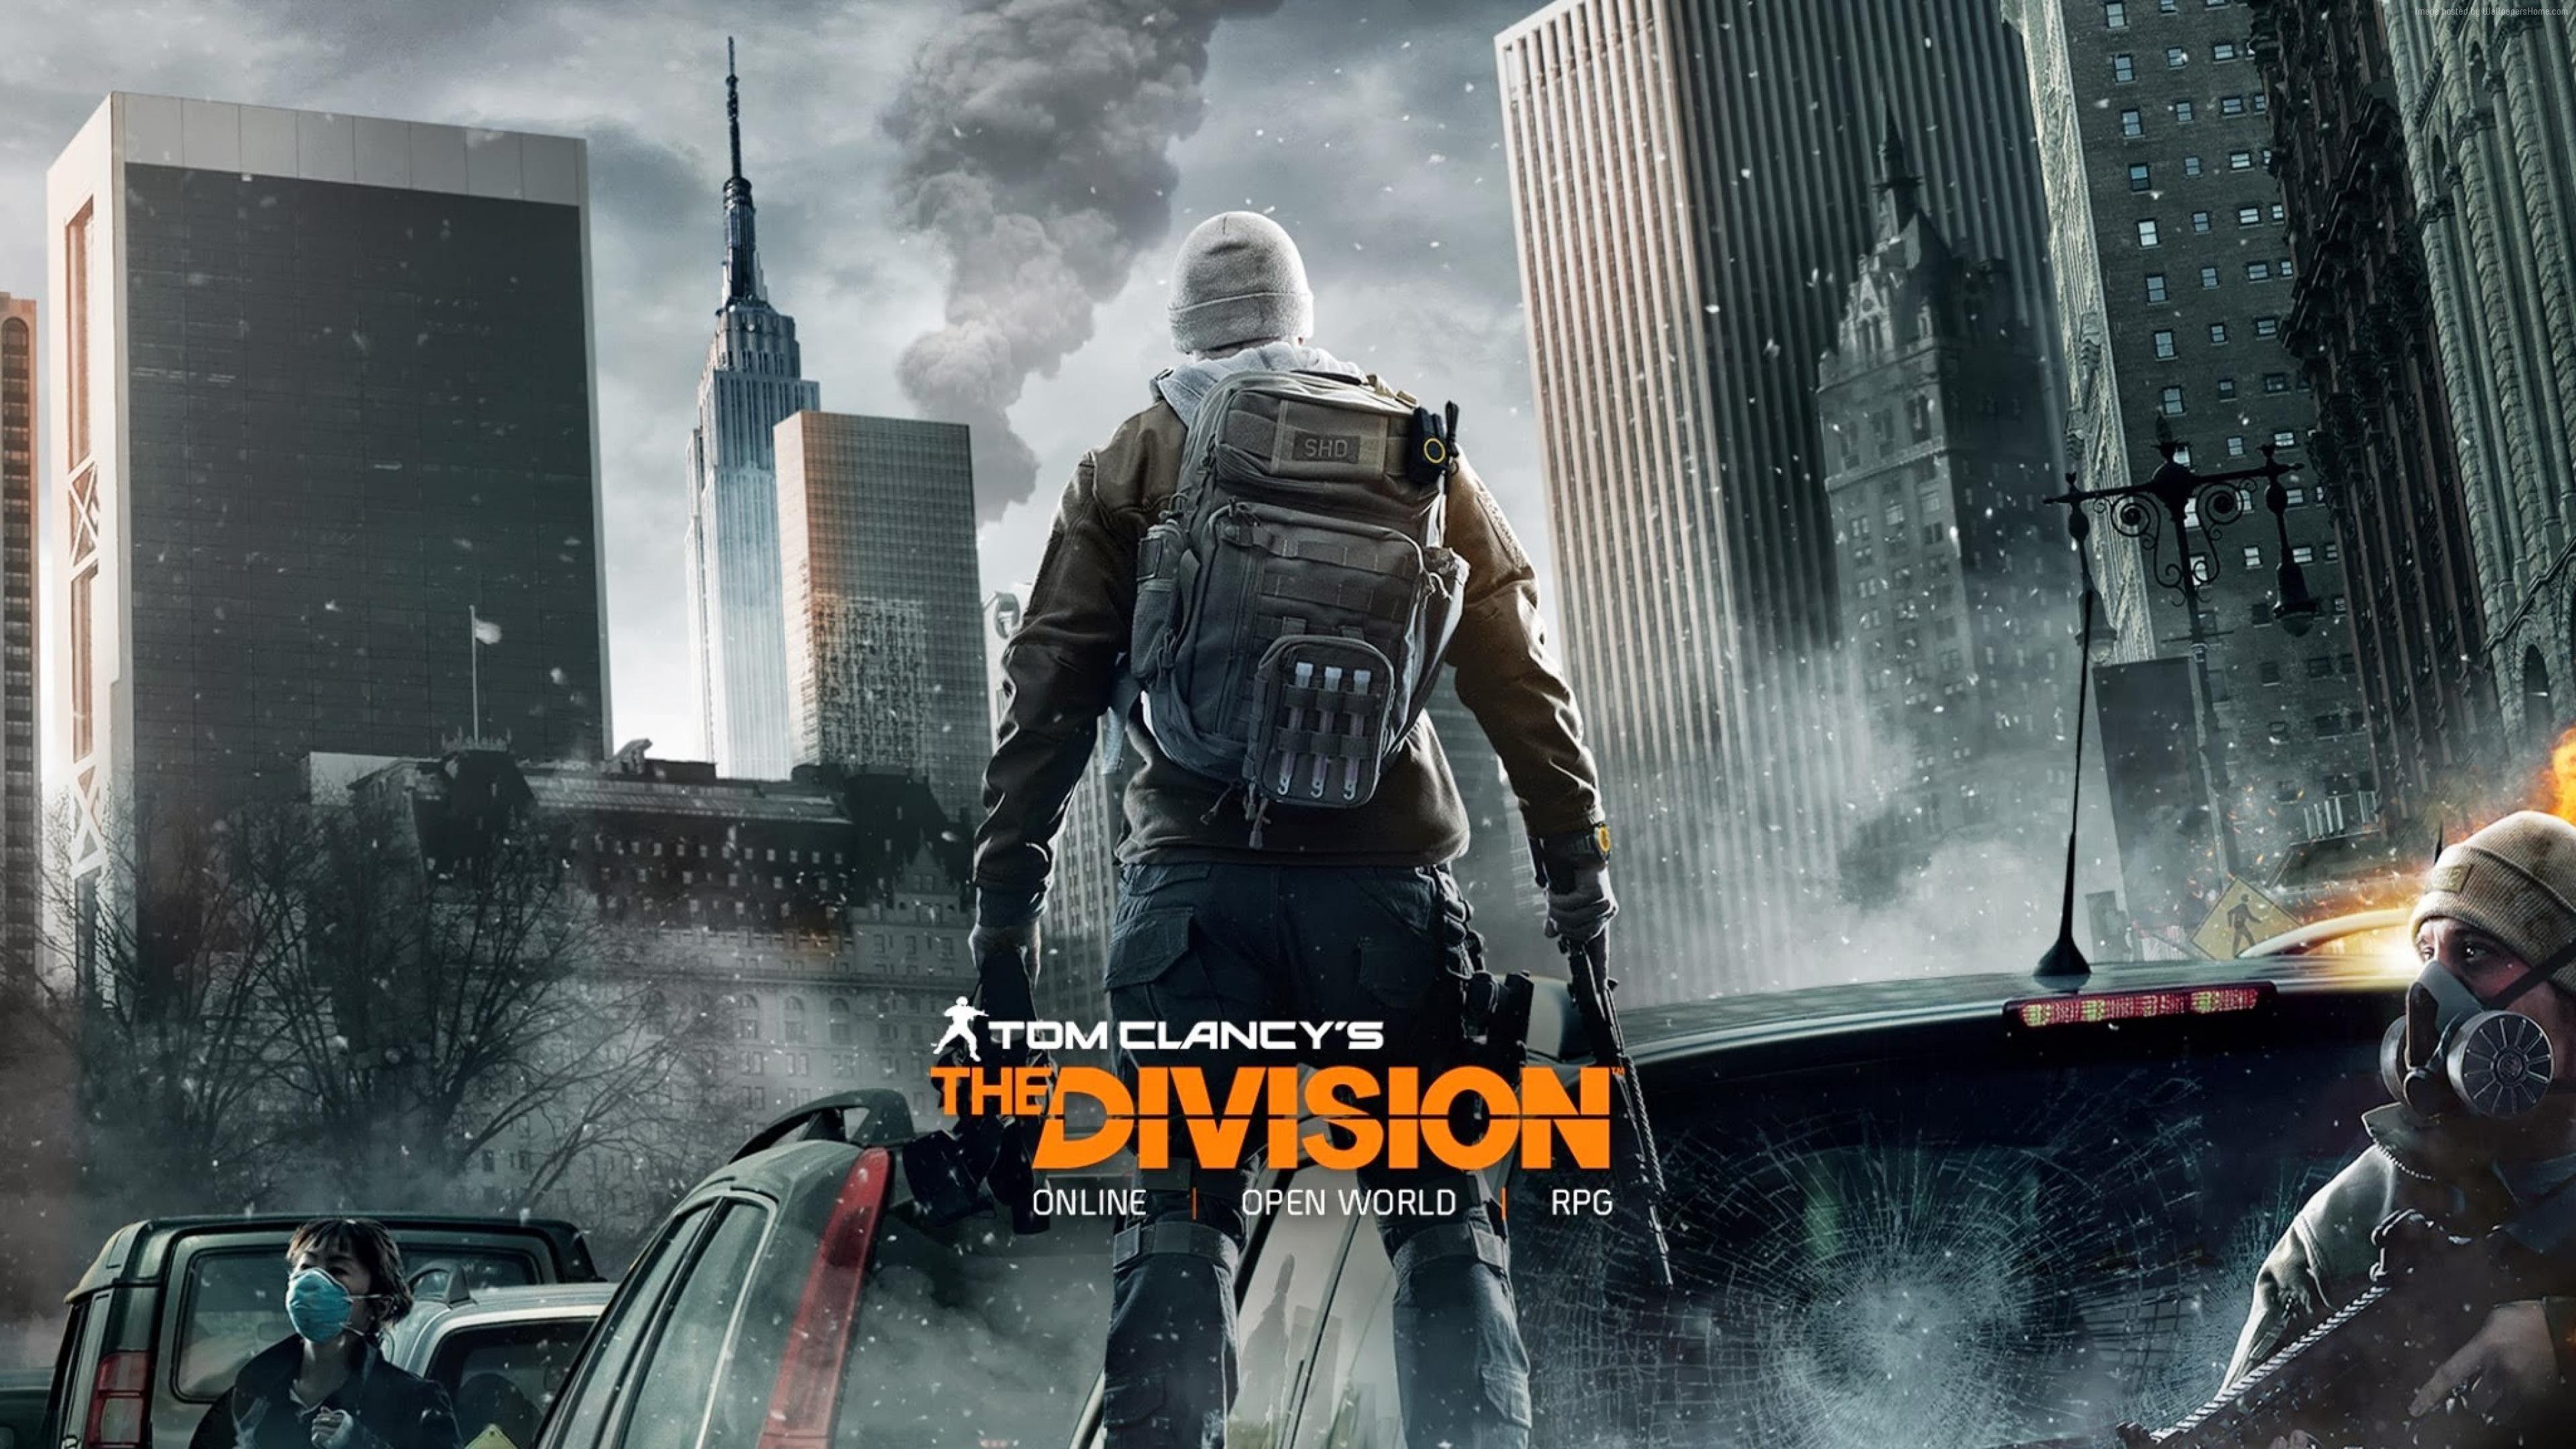 Wallpaper Games: TOM CLANCYS THE DIVISION WALLPAPER FULL HD 1080P